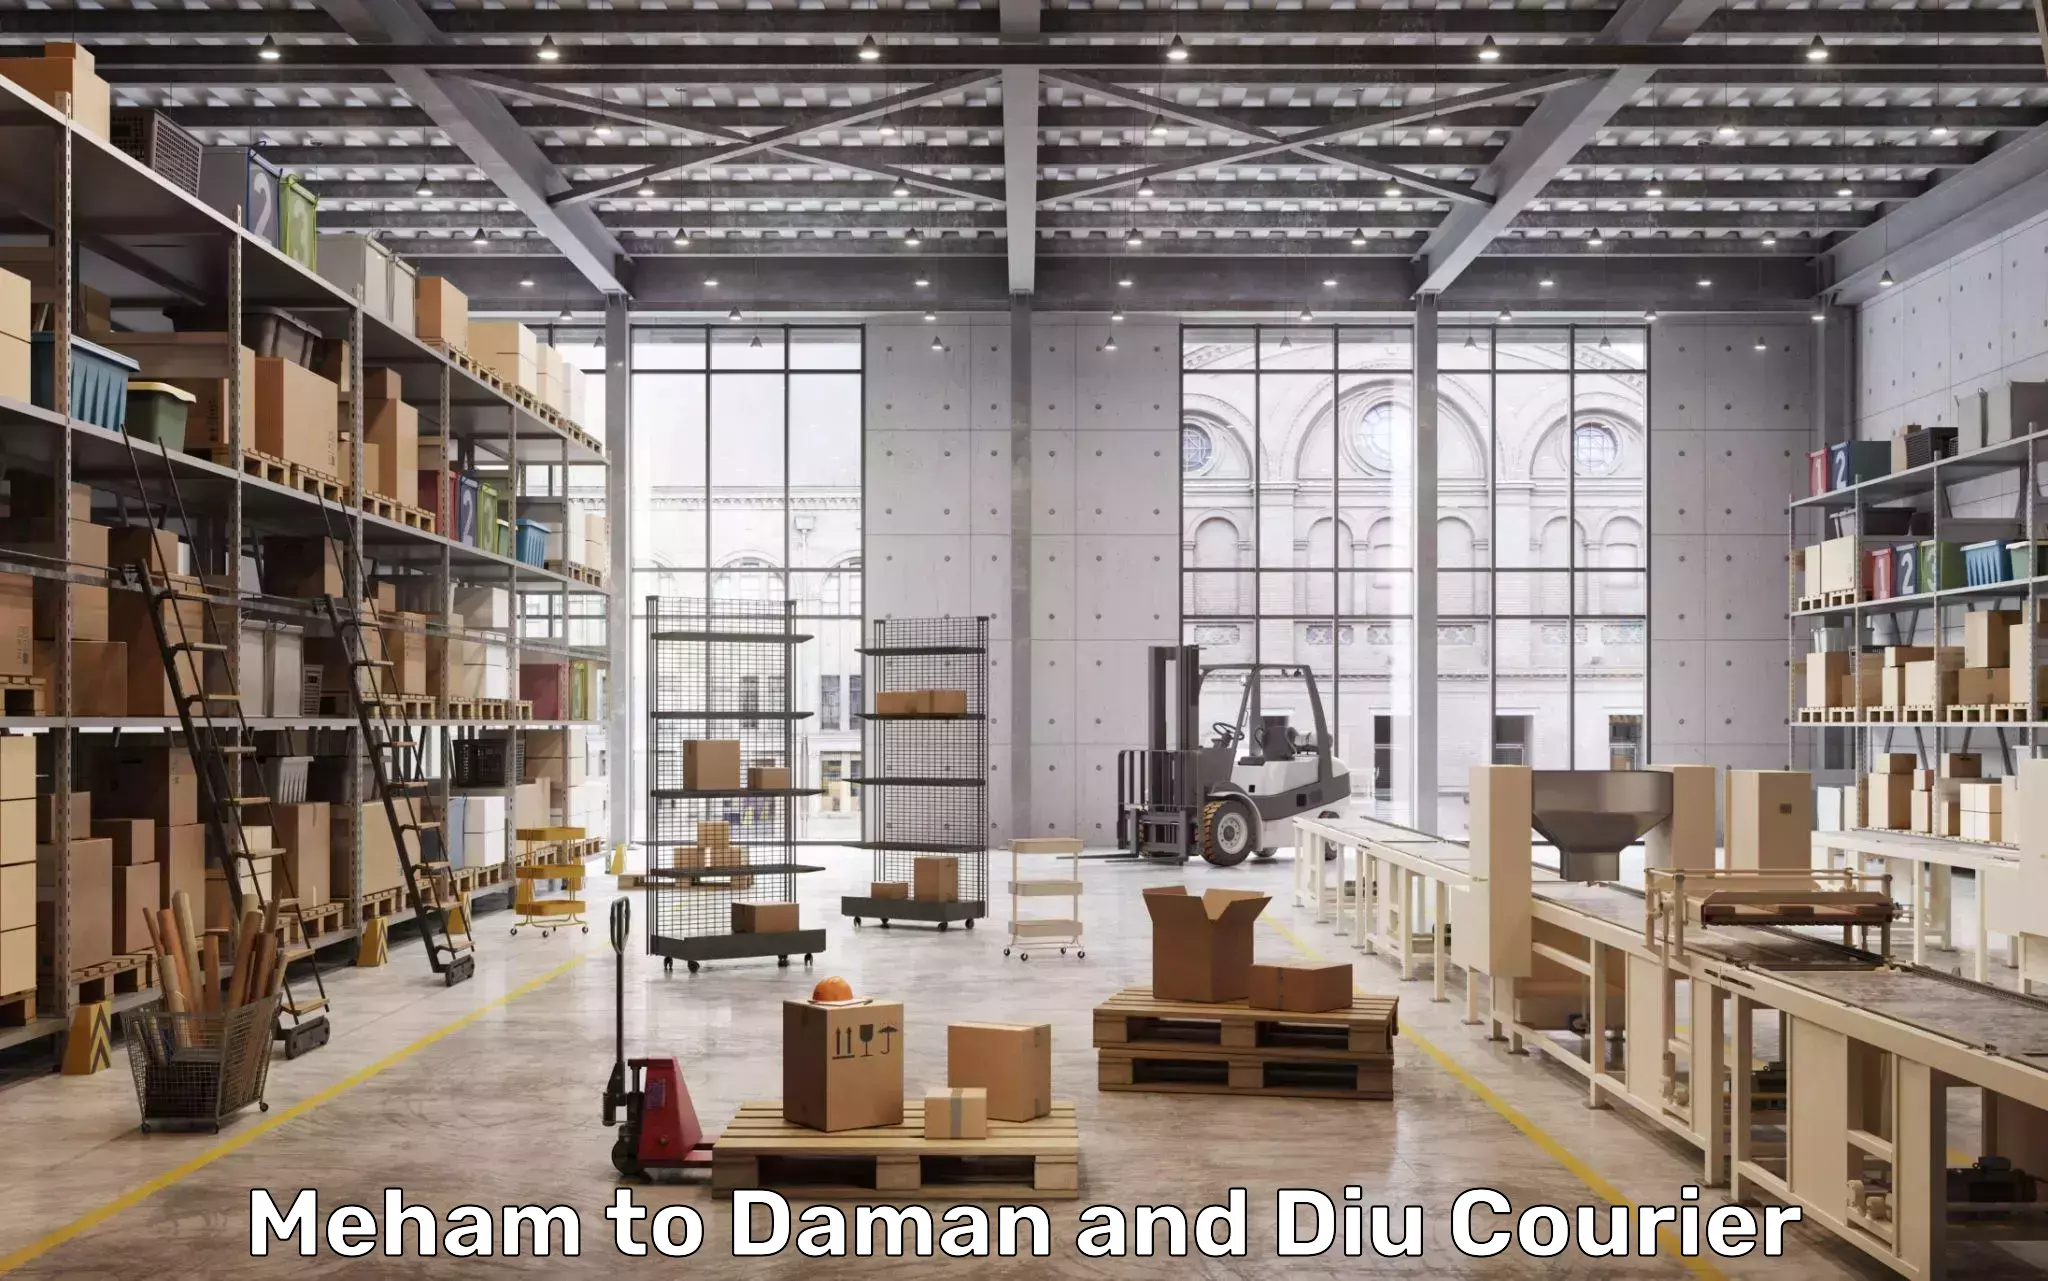 Hassle-free luggage shipping Meham to Daman and Diu